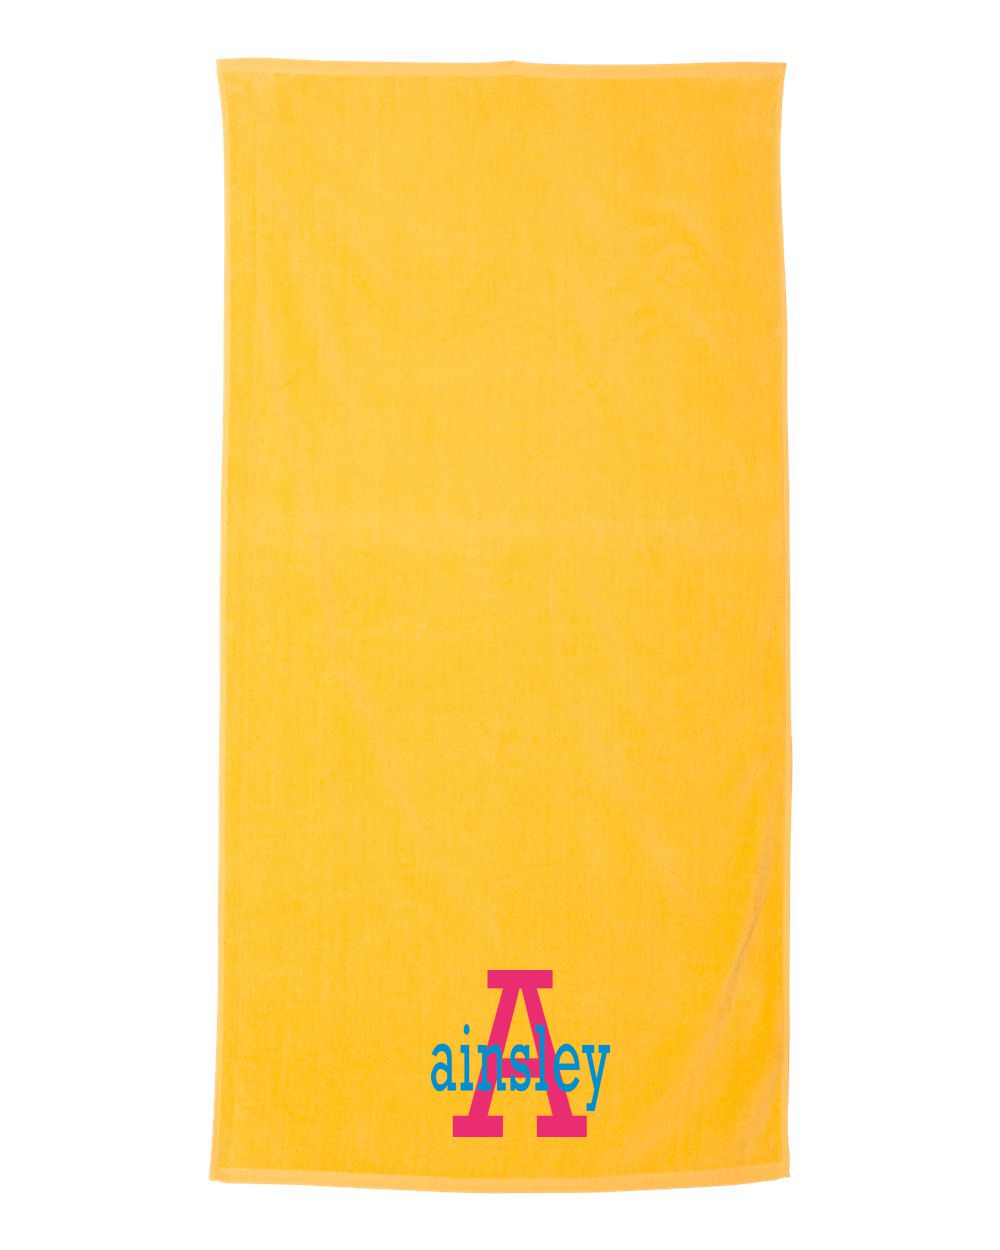 Solid Color Velour Beach Towel with Embroidery